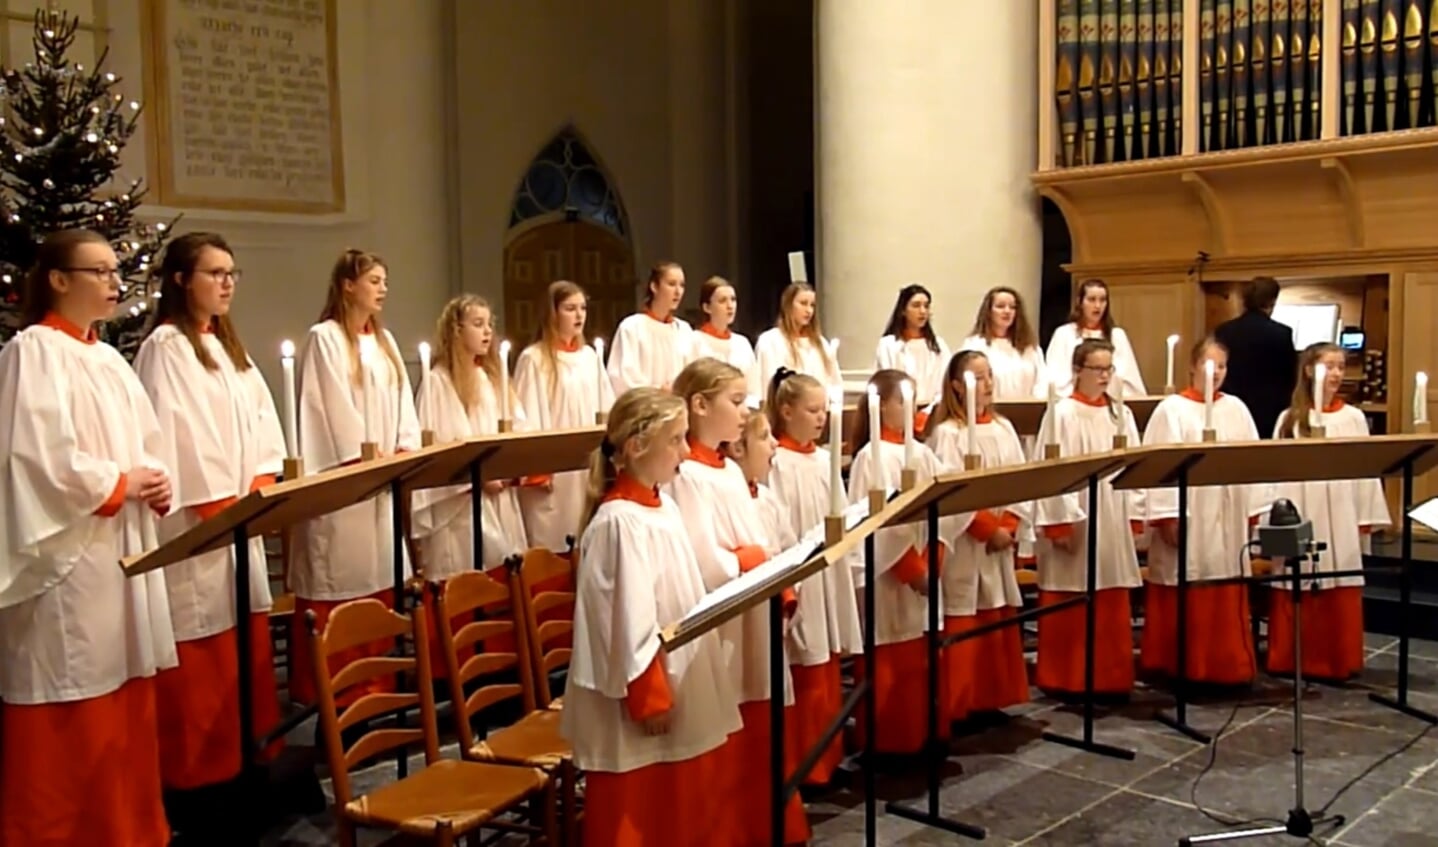 Festival of Lessons and Carols in 2019